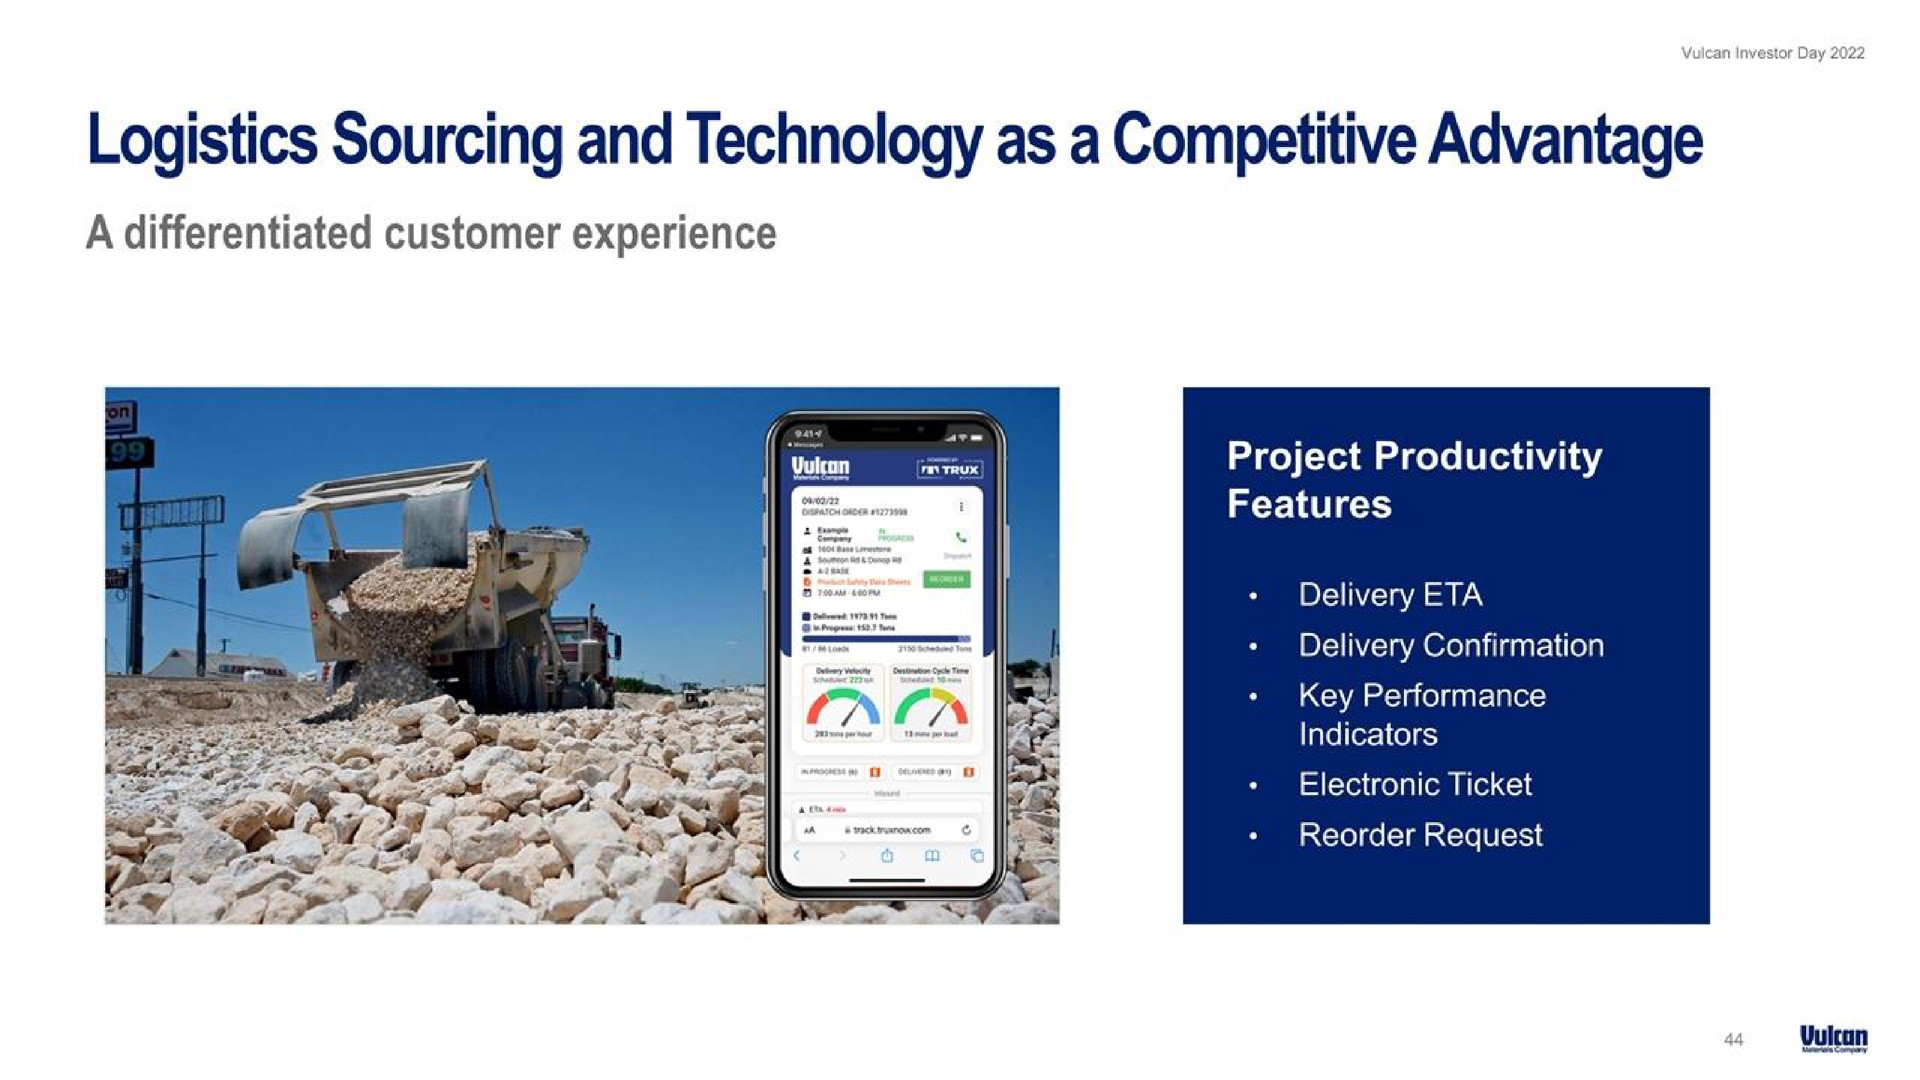 logistics sourcing and technology as a competitive advantage | Vulcan Materials